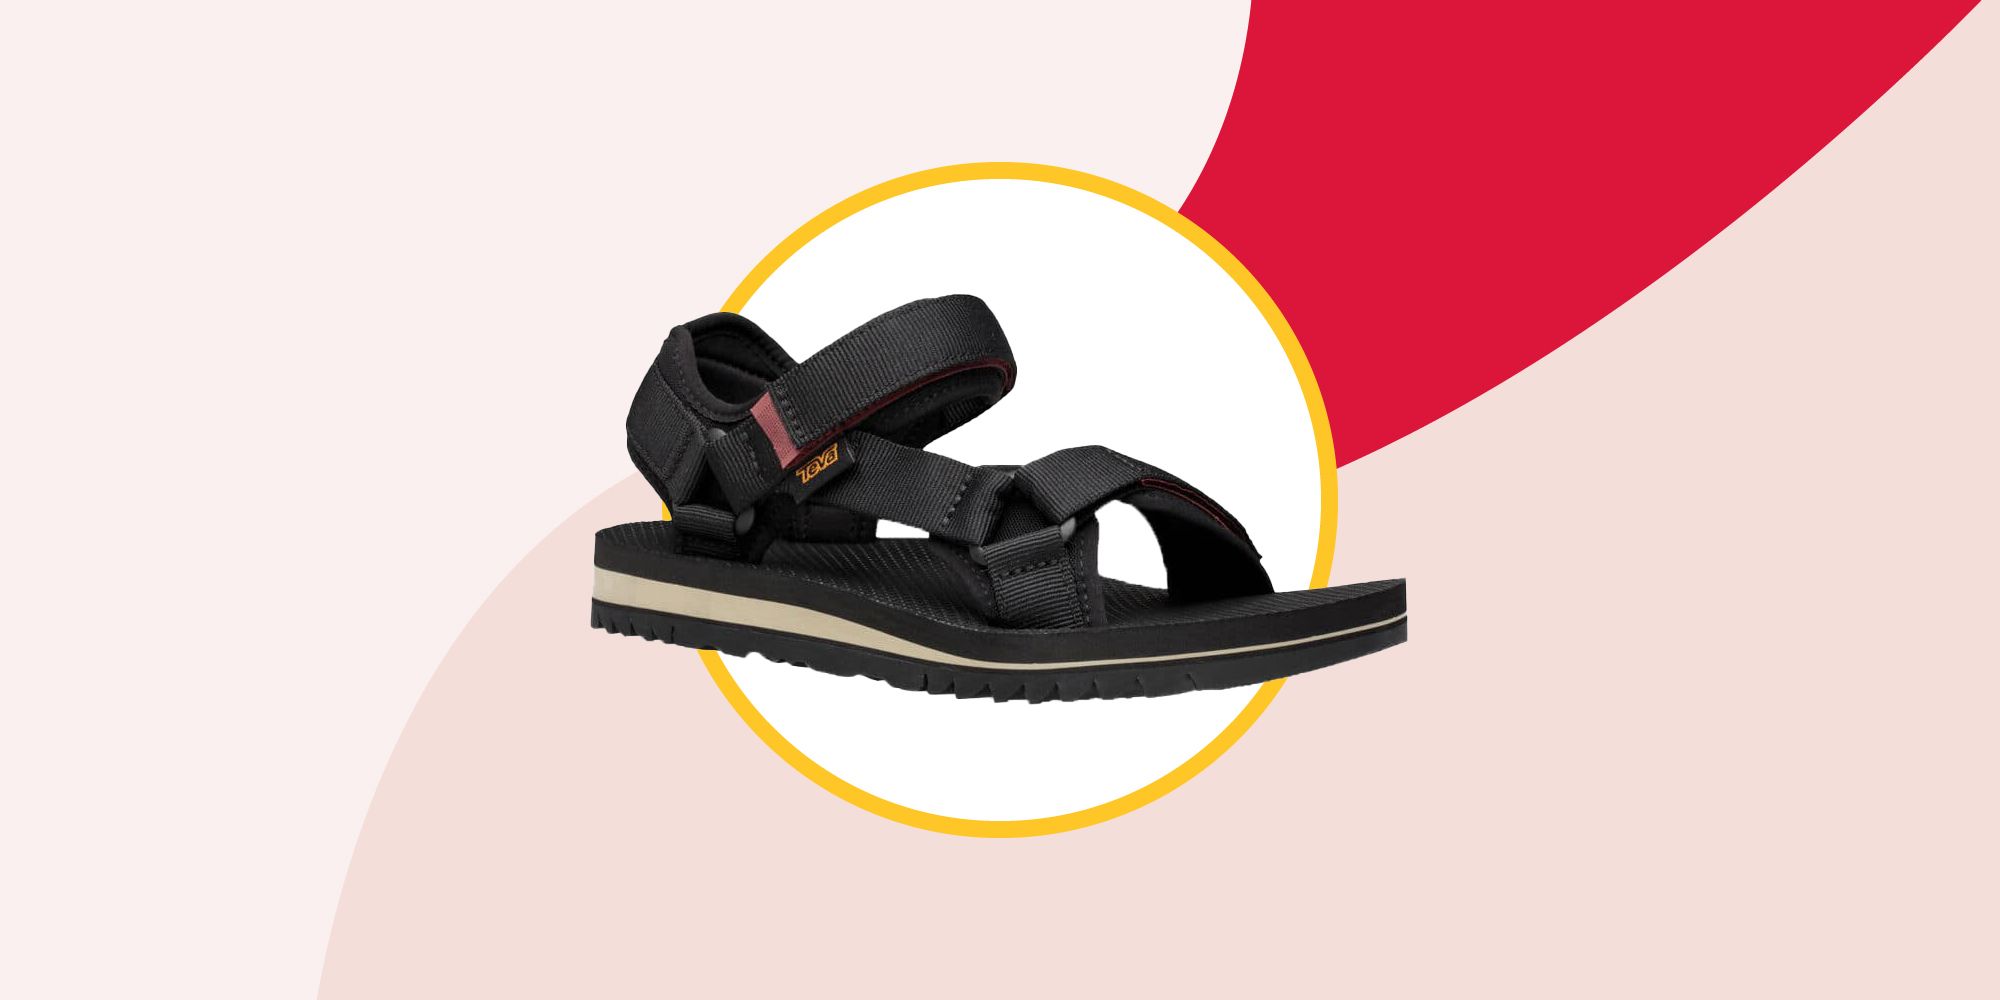 Buy > best rated walking sandals > in stock